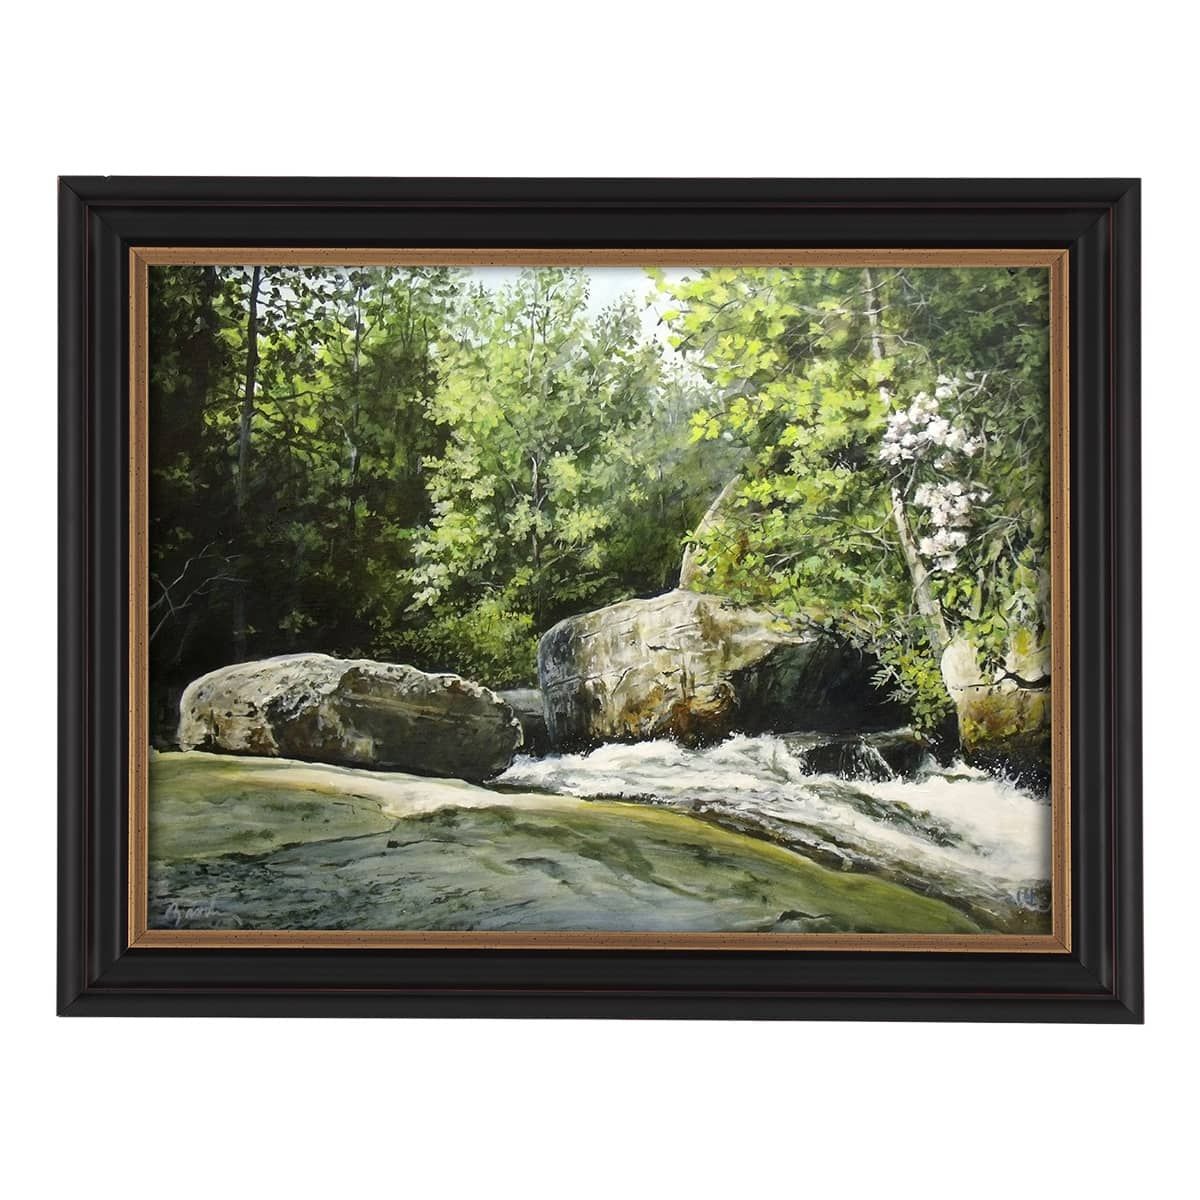 Millbrook Collection - Naples 1.5" Black/ Gold Frame 22X28 w/ Acrylic